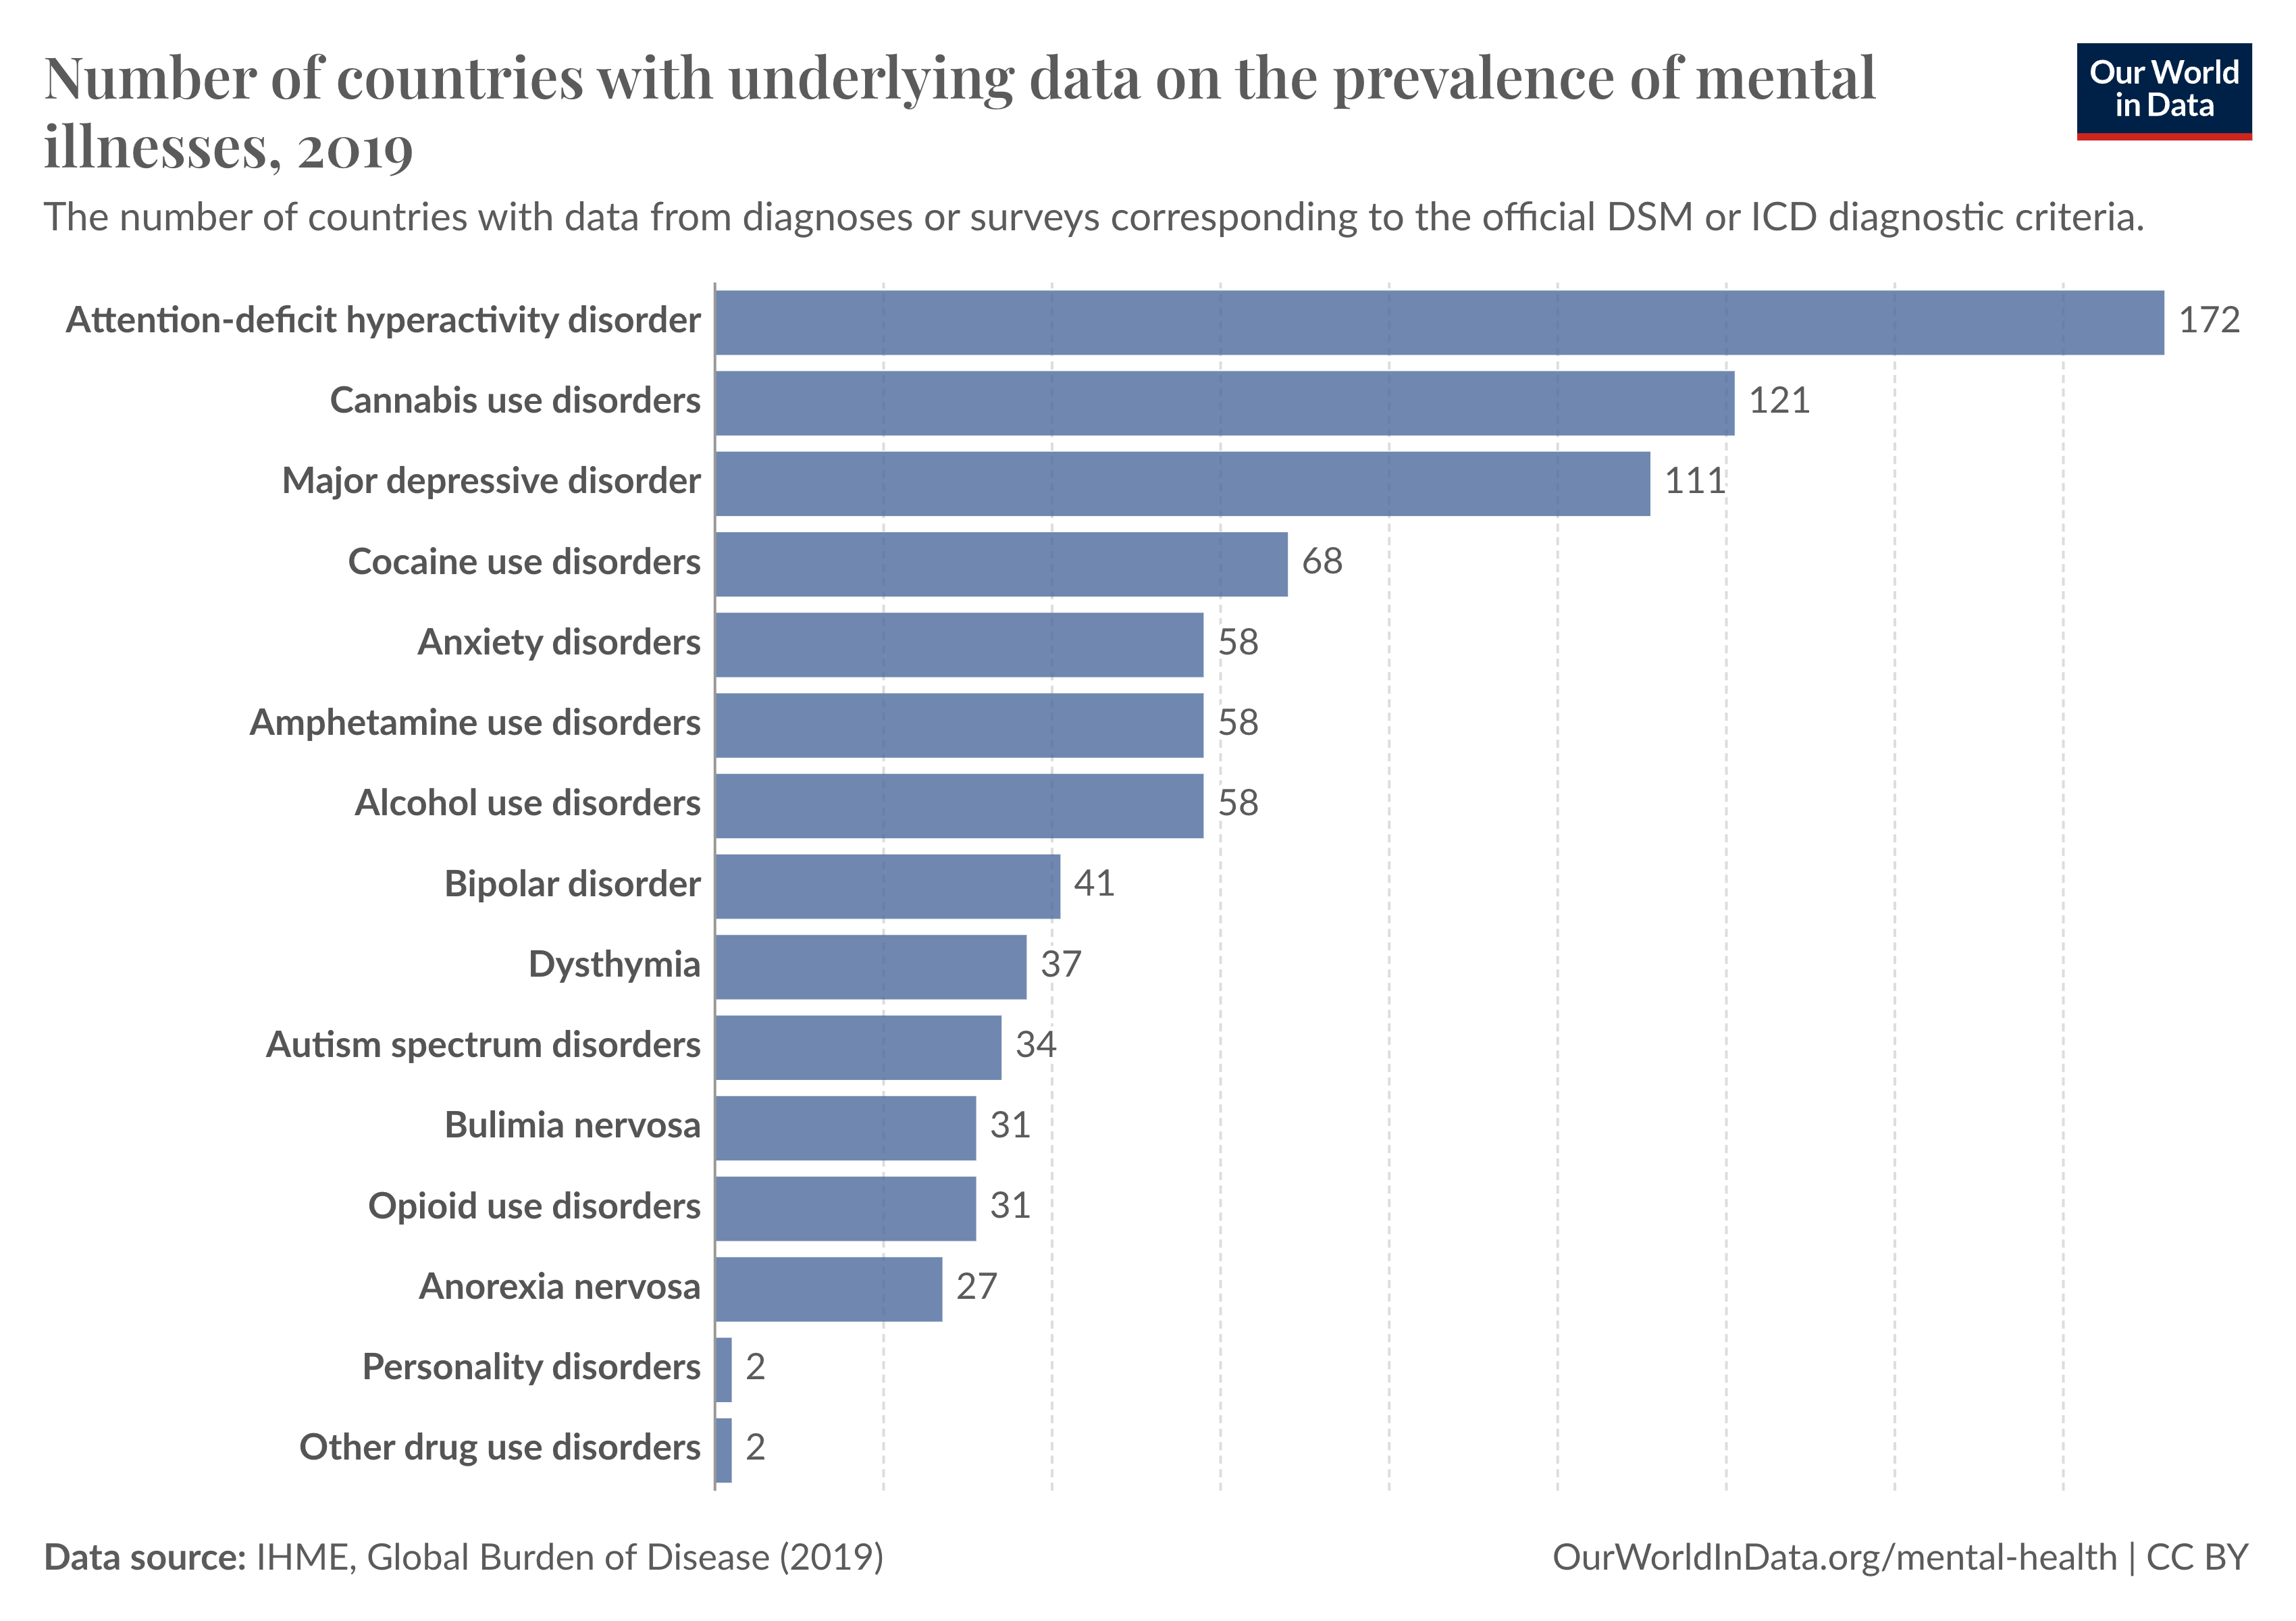 This chart shows, for each mental illness, the number of countries that had data in any year since 1980 on the prevalence of that mental illness in the general population. 
This is from the IHME’s Global Burden of Disease study, a large global dataset that presents global estimates for a very wide range of health conditions.
As you can see, data on conditions such as attention-deficit hyperactivity disorder, cannabis use disorder, and major depressive disorder come from a larger number of countries.
But data on others — such as bipolar disorder, autism spectrum disorders, and anorexia nervosa — came from far fewer countries.
